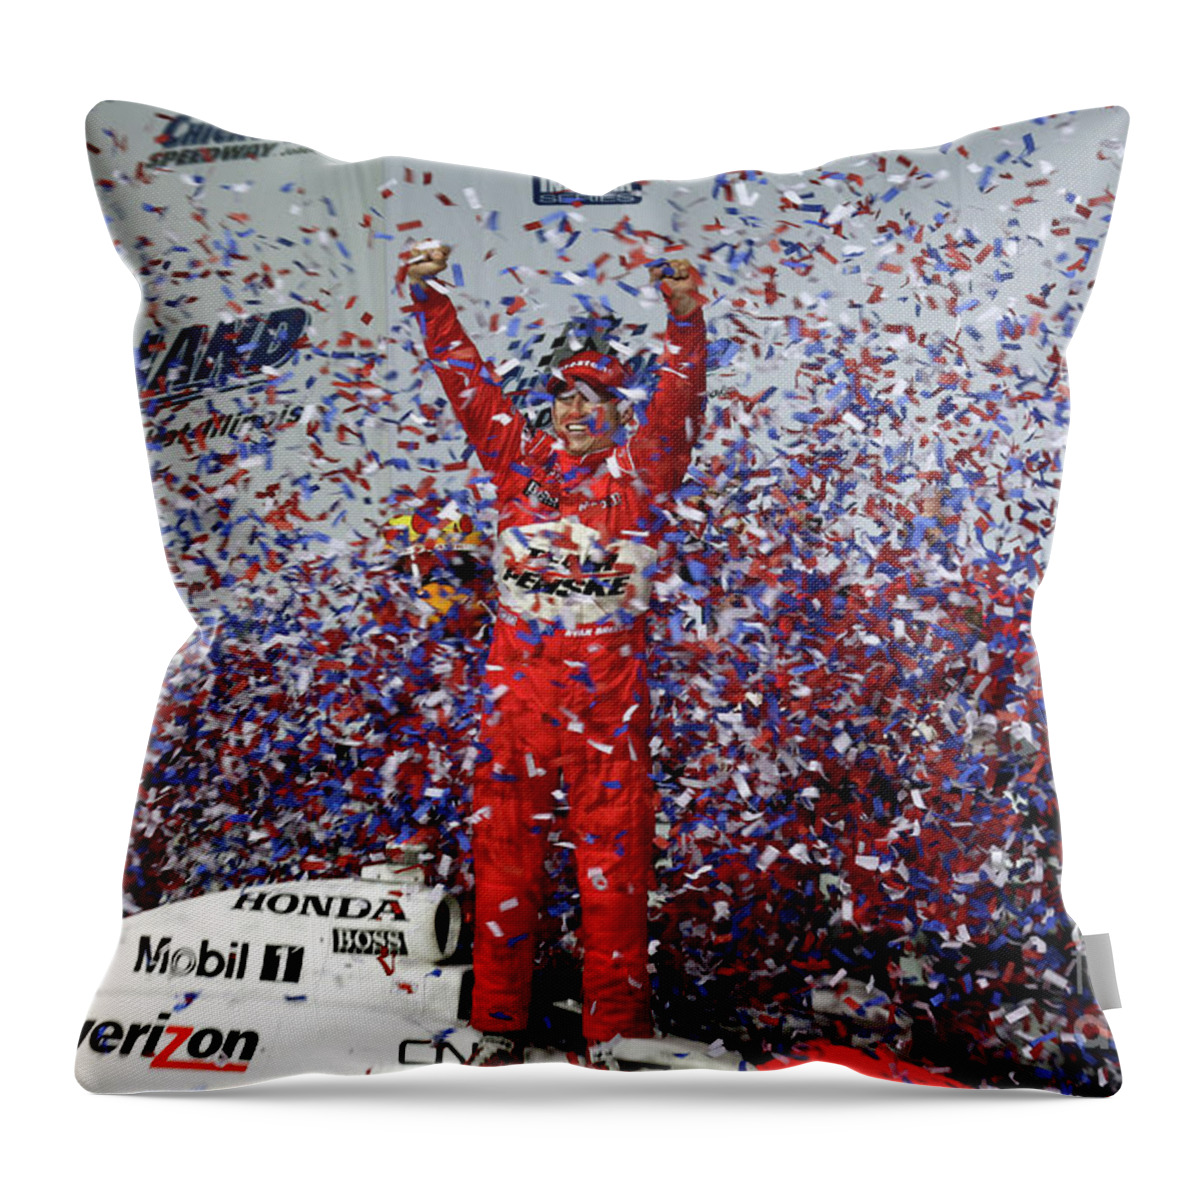 Champcar Throw Pillow featuring the photograph Ryan Brisco - Indycar Racing Chicagoland Speedway Illinois by Pete Klinger